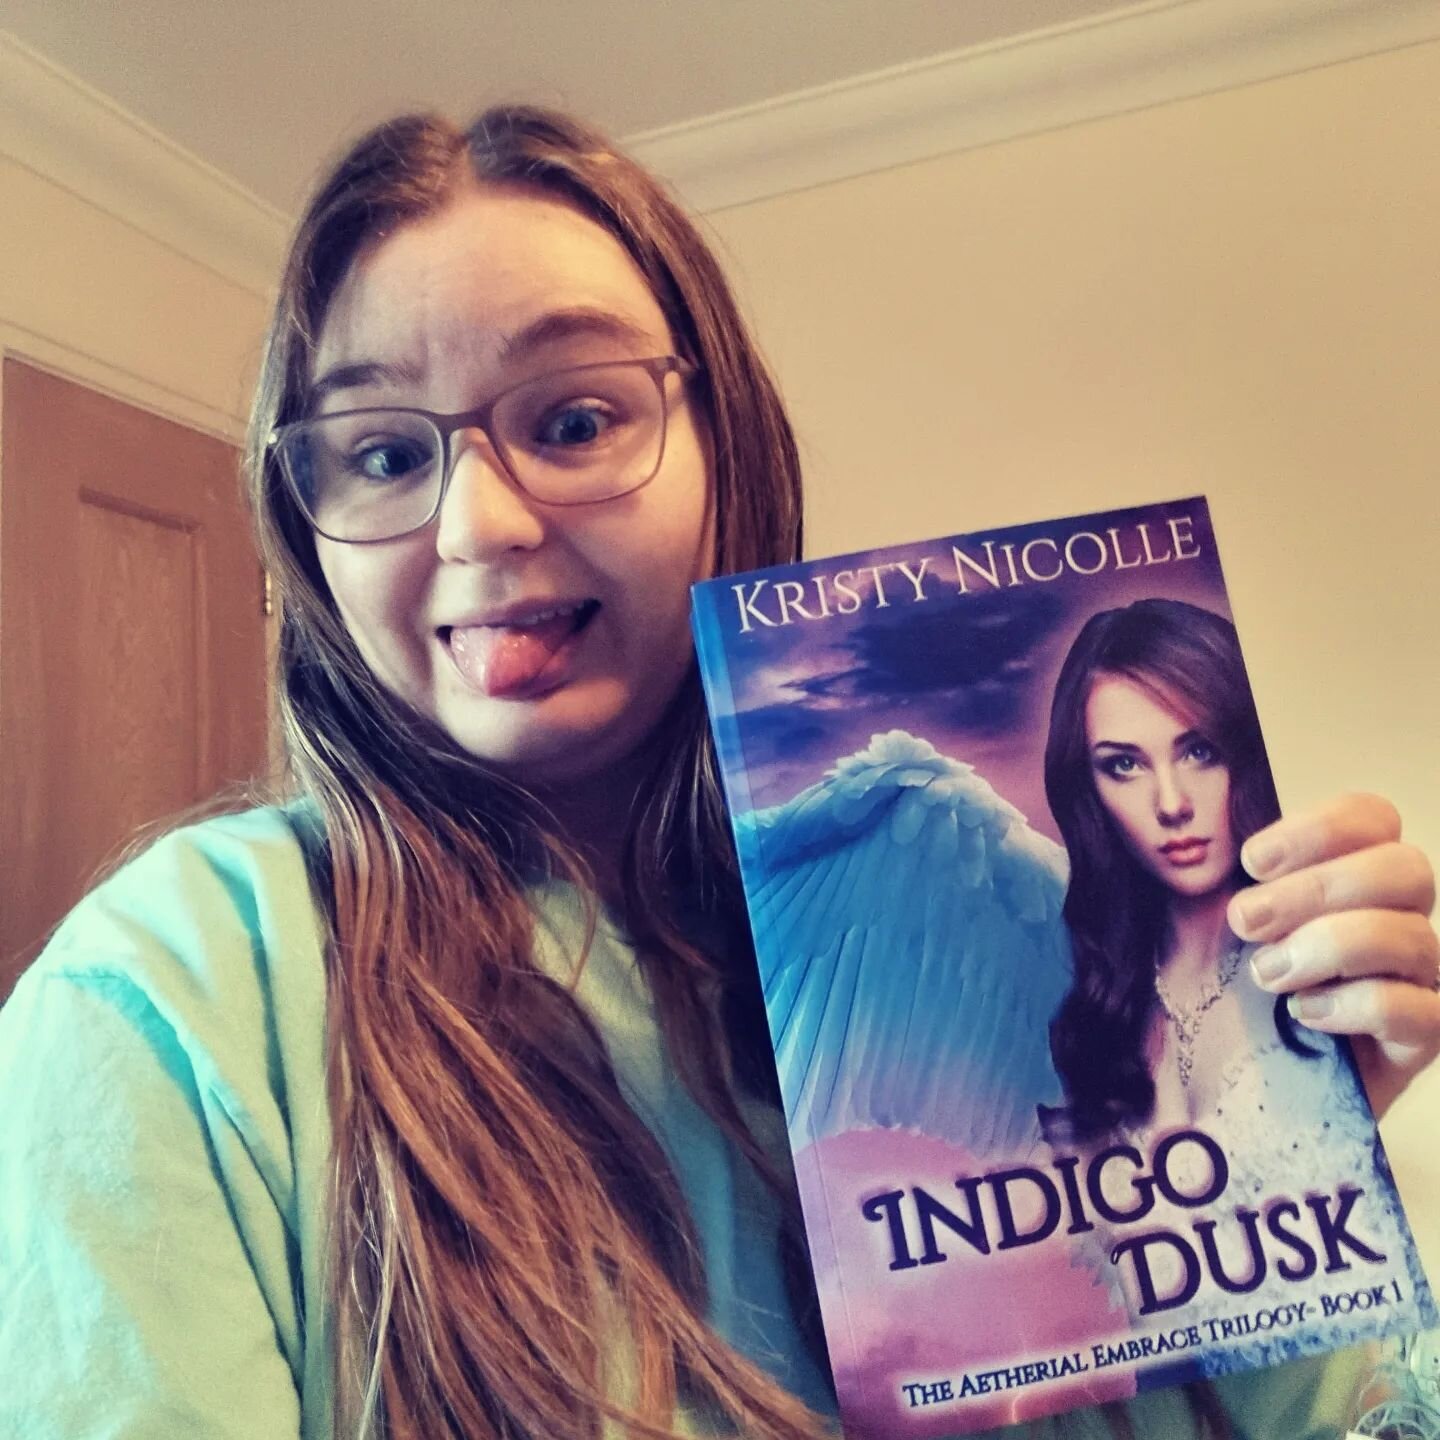 Guess What's Free This Week!!!!

I've got something special for fantasy romance lovers!! 📖

Indigo Dusk is a spicy spin on Greek mythology packed with dragons, unicorns, angels, and more. From the award-winning creative mind of Kristy Nicolle, this 